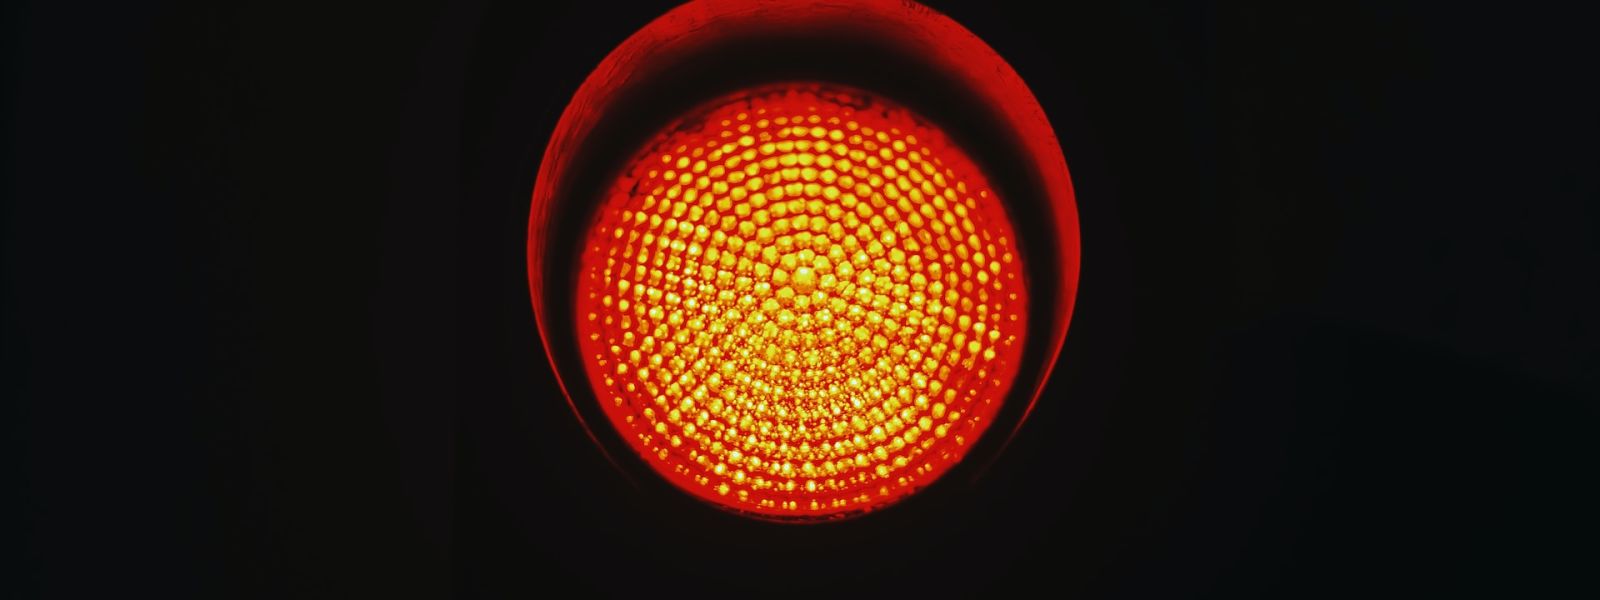 A red traffic light with a completely black background.